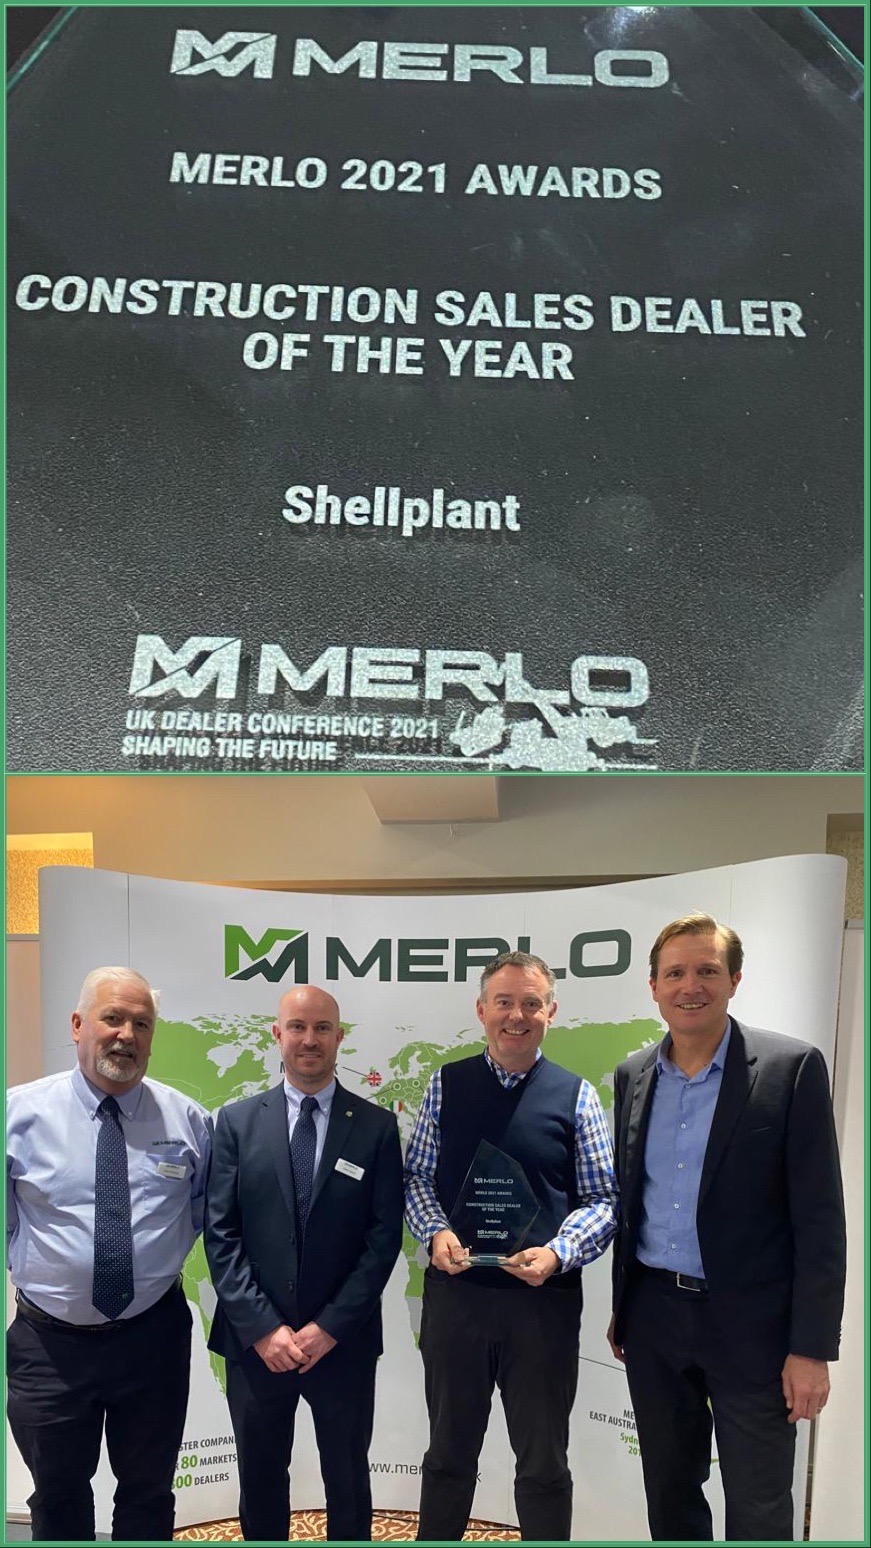 Shellplant Merlo construction sales dealer of the year 2021